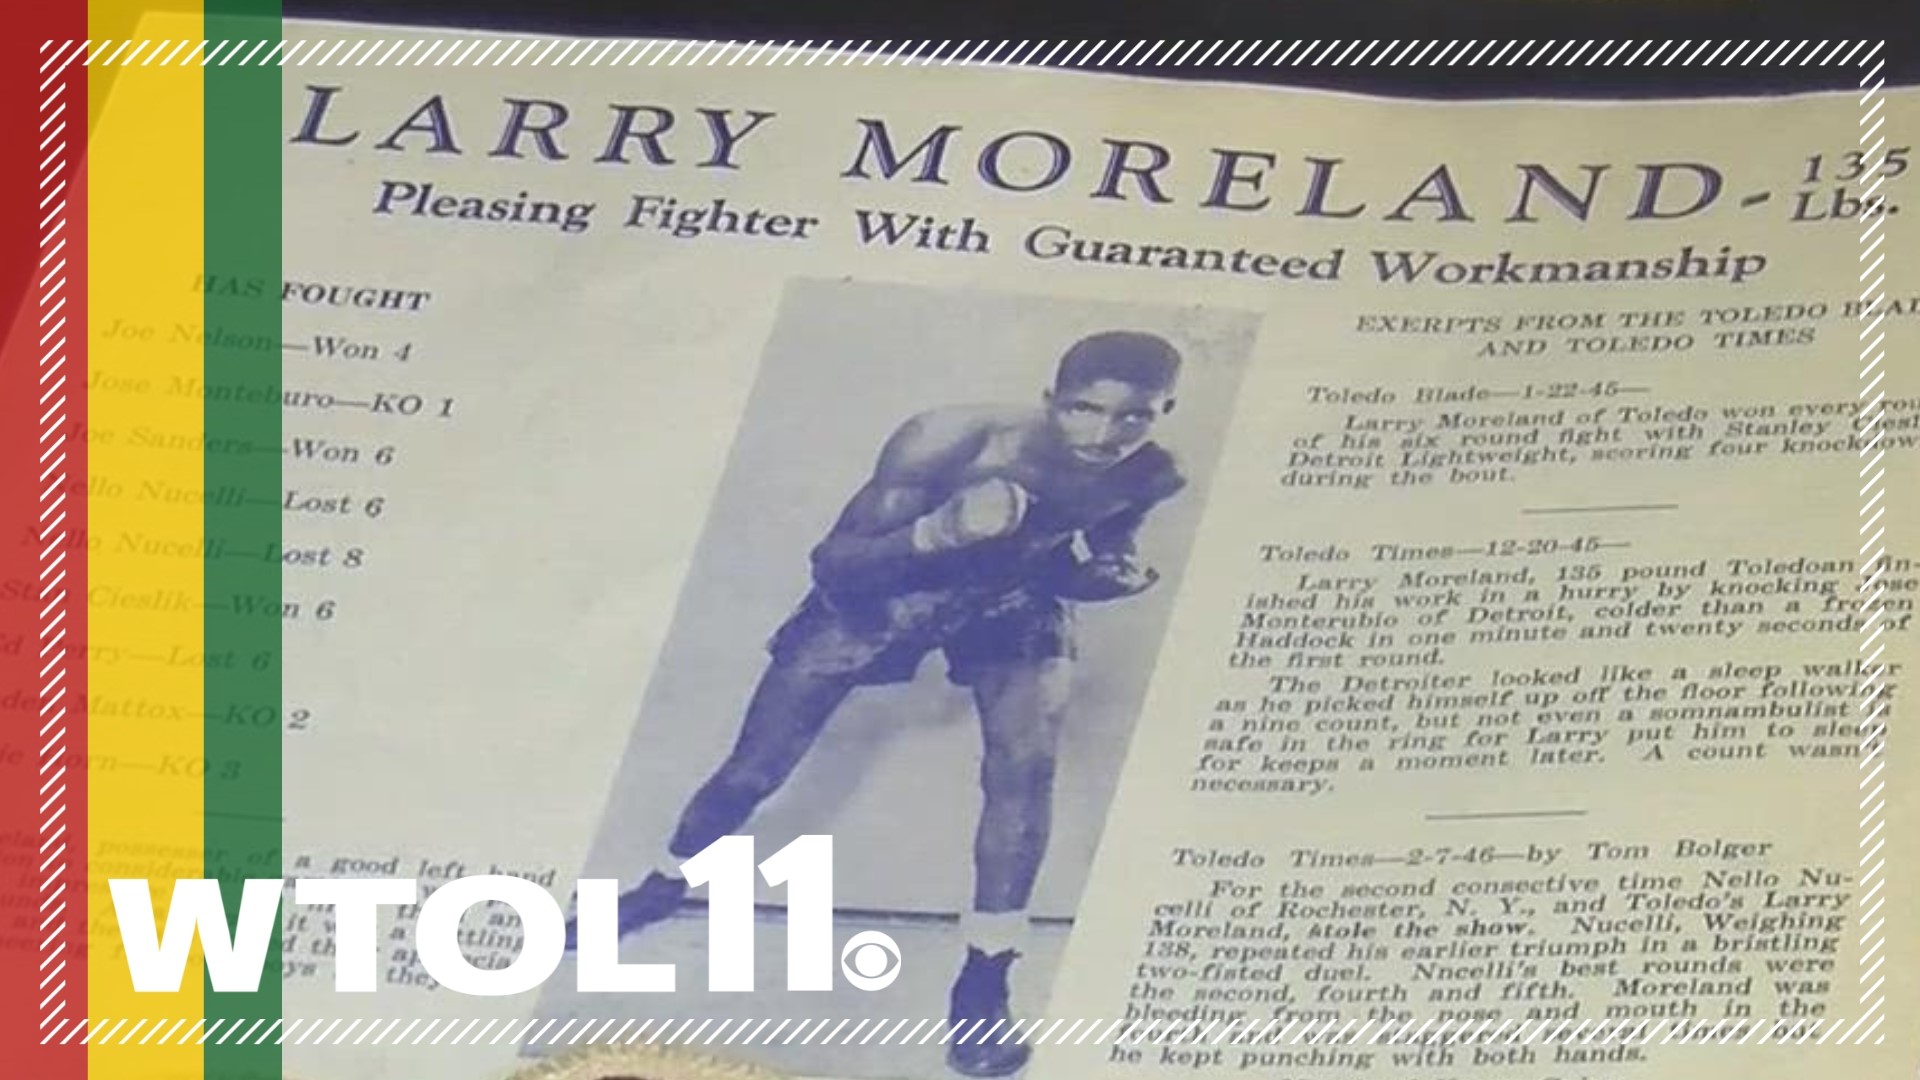 Larry Moreland is considered the father of modern boxing in Toledo, becoming the first person of color to own and operate a gym in the city back in the 1950s.